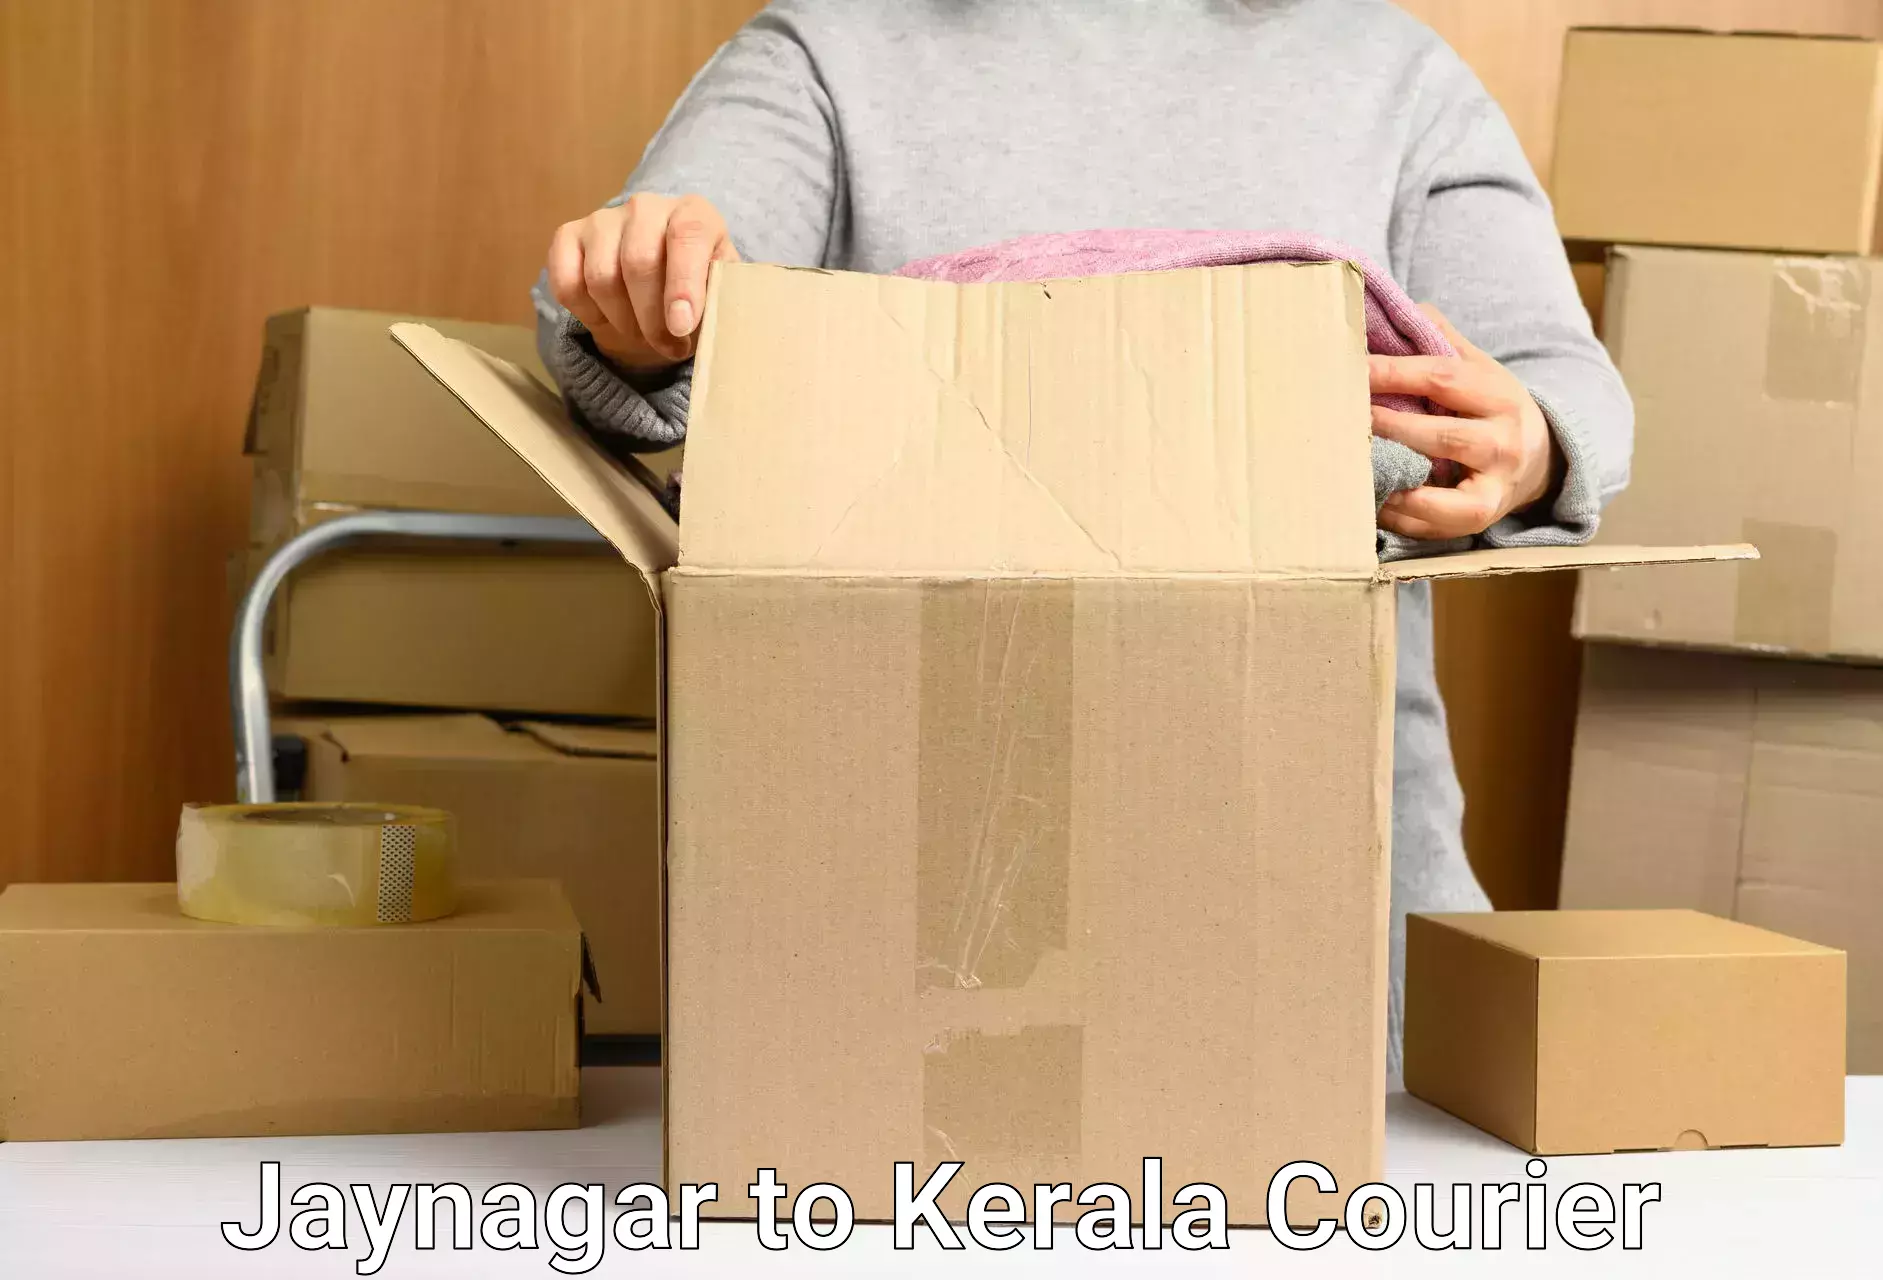 Reliable logistics providers Jaynagar to Parappa